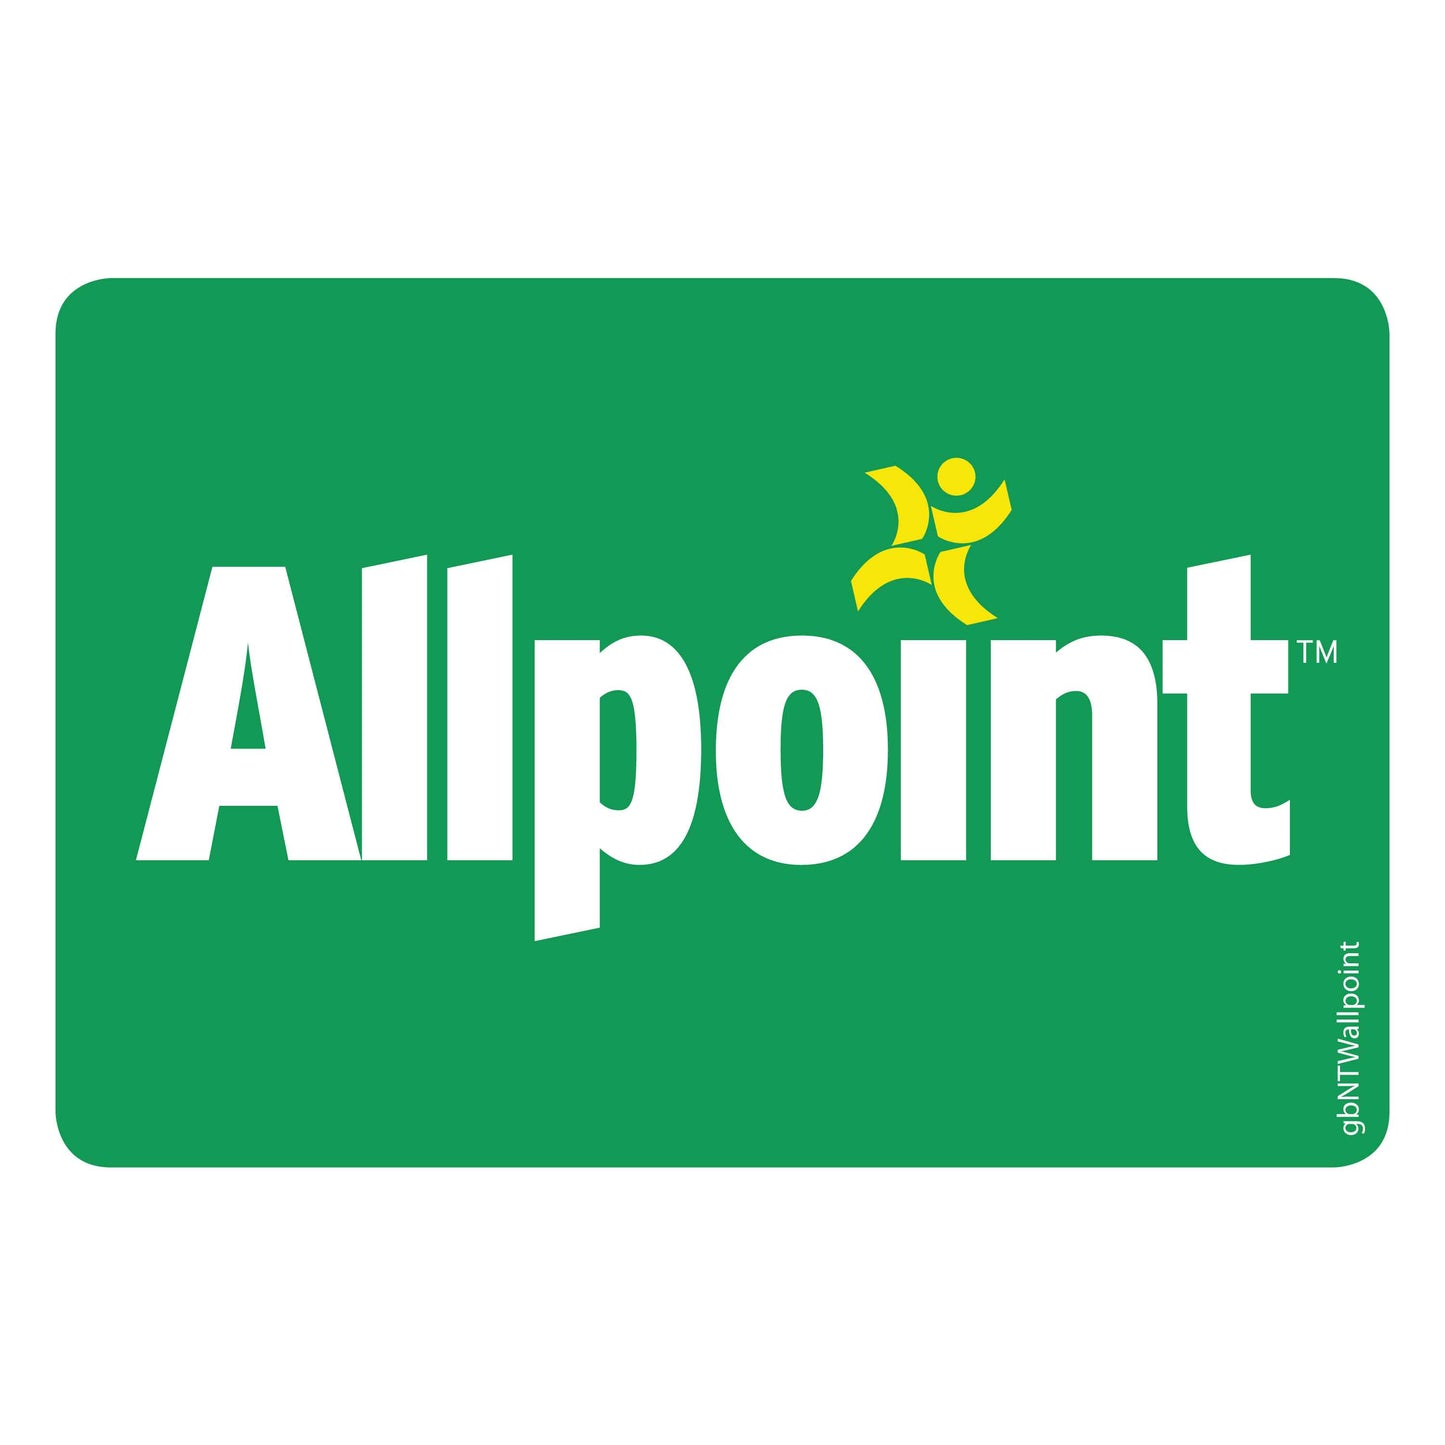 Single Network ATM Decal, Allpoint. 3 inches by 2 inches in size.